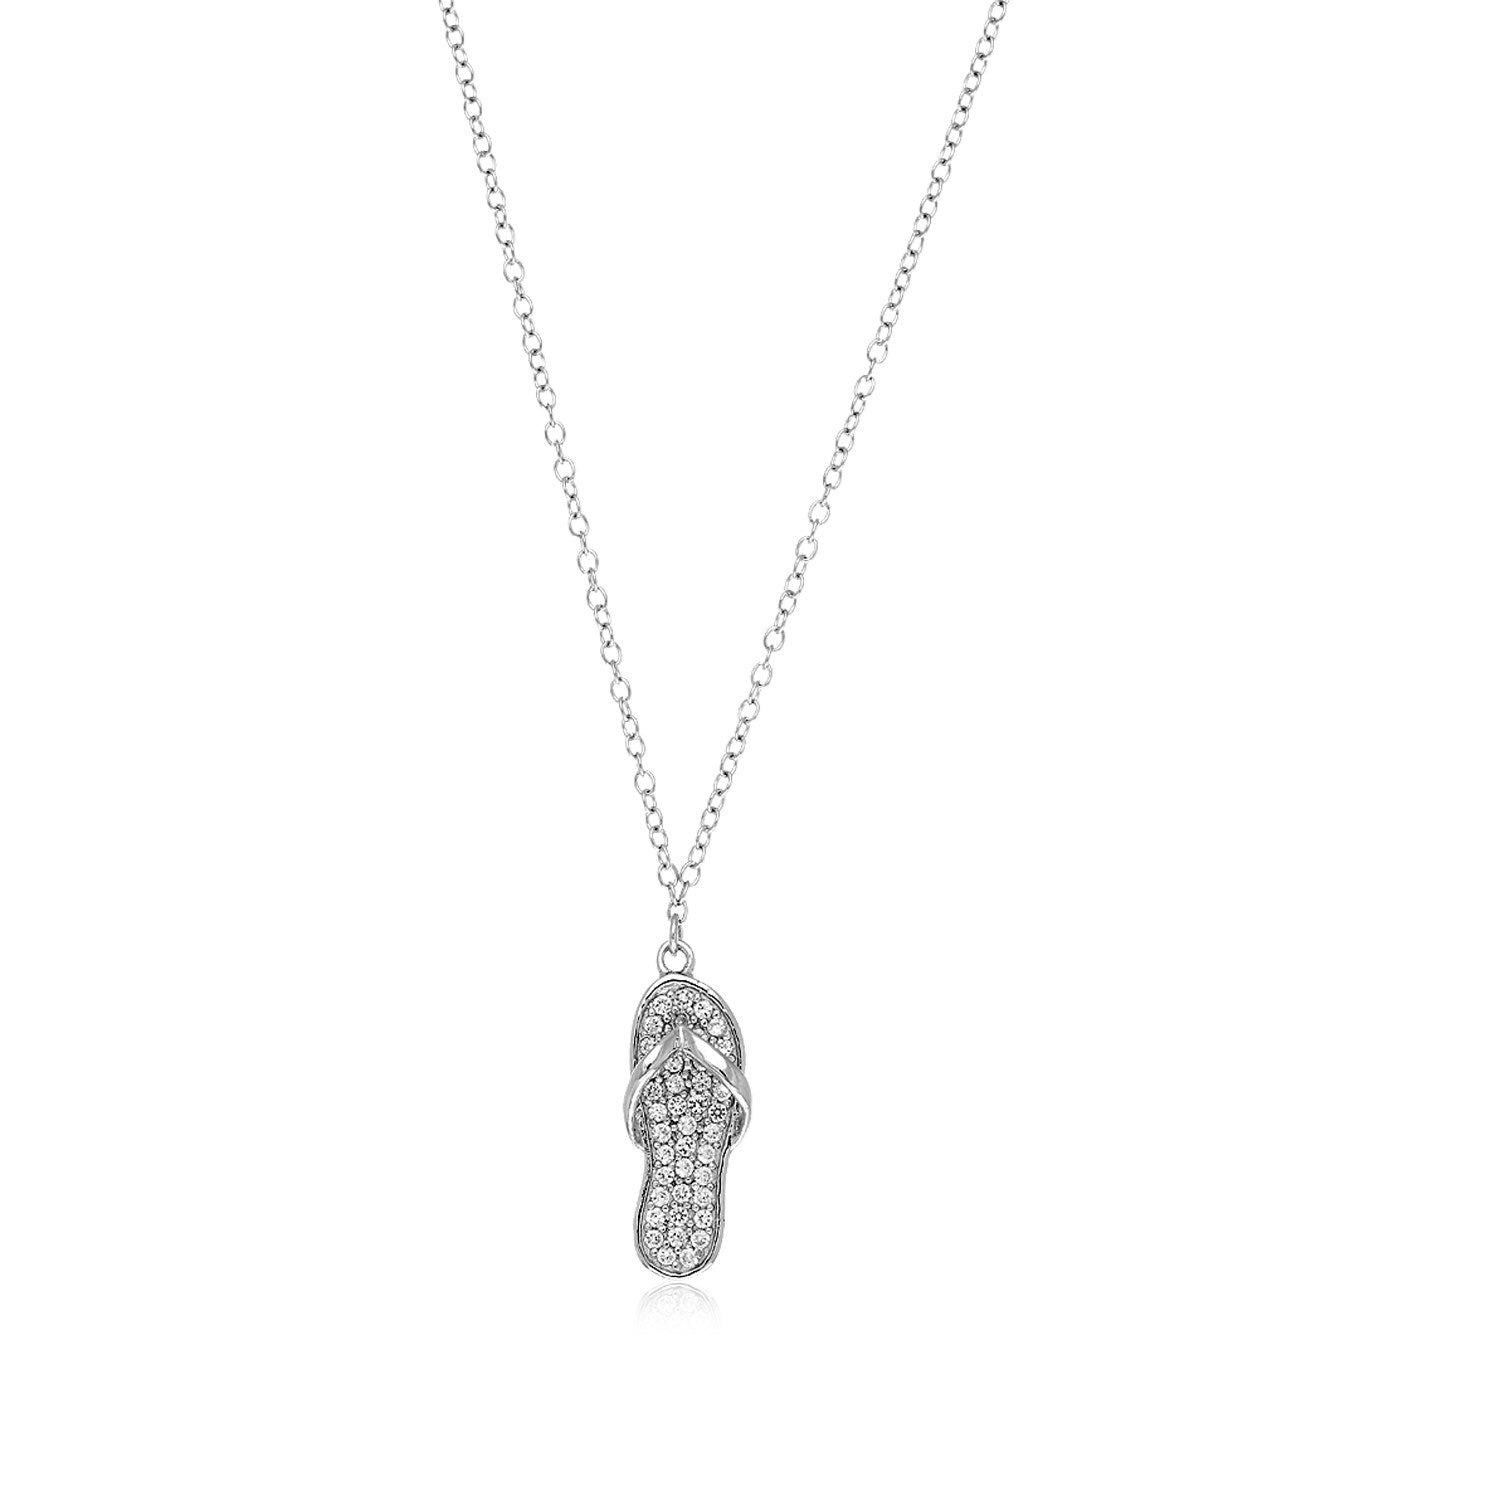 Size: 18'' - Sterling Silver Flip Flop Necklace with Cubic Zirconias